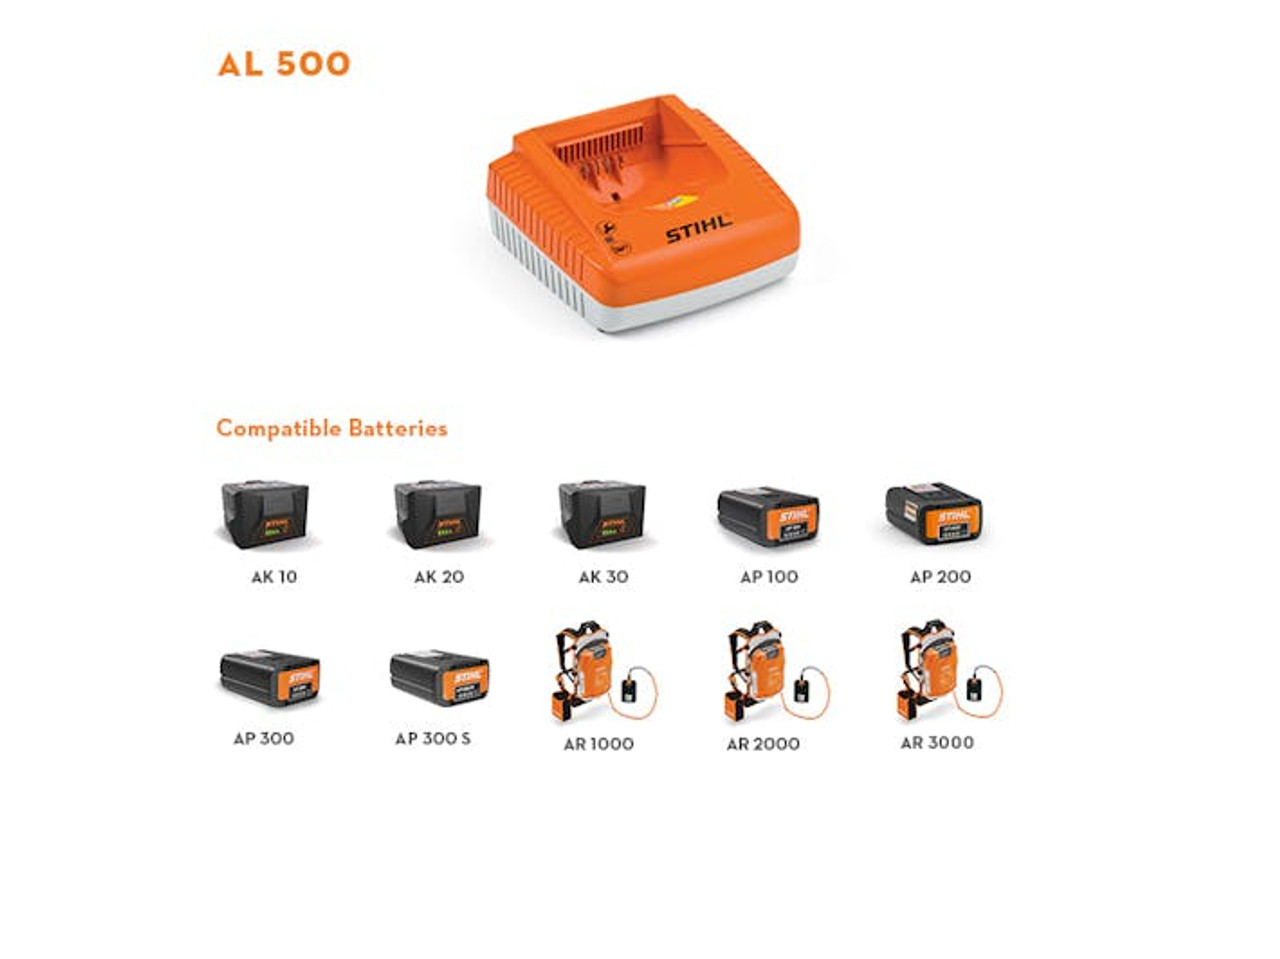 AL 500 High-Speed Battery Charger